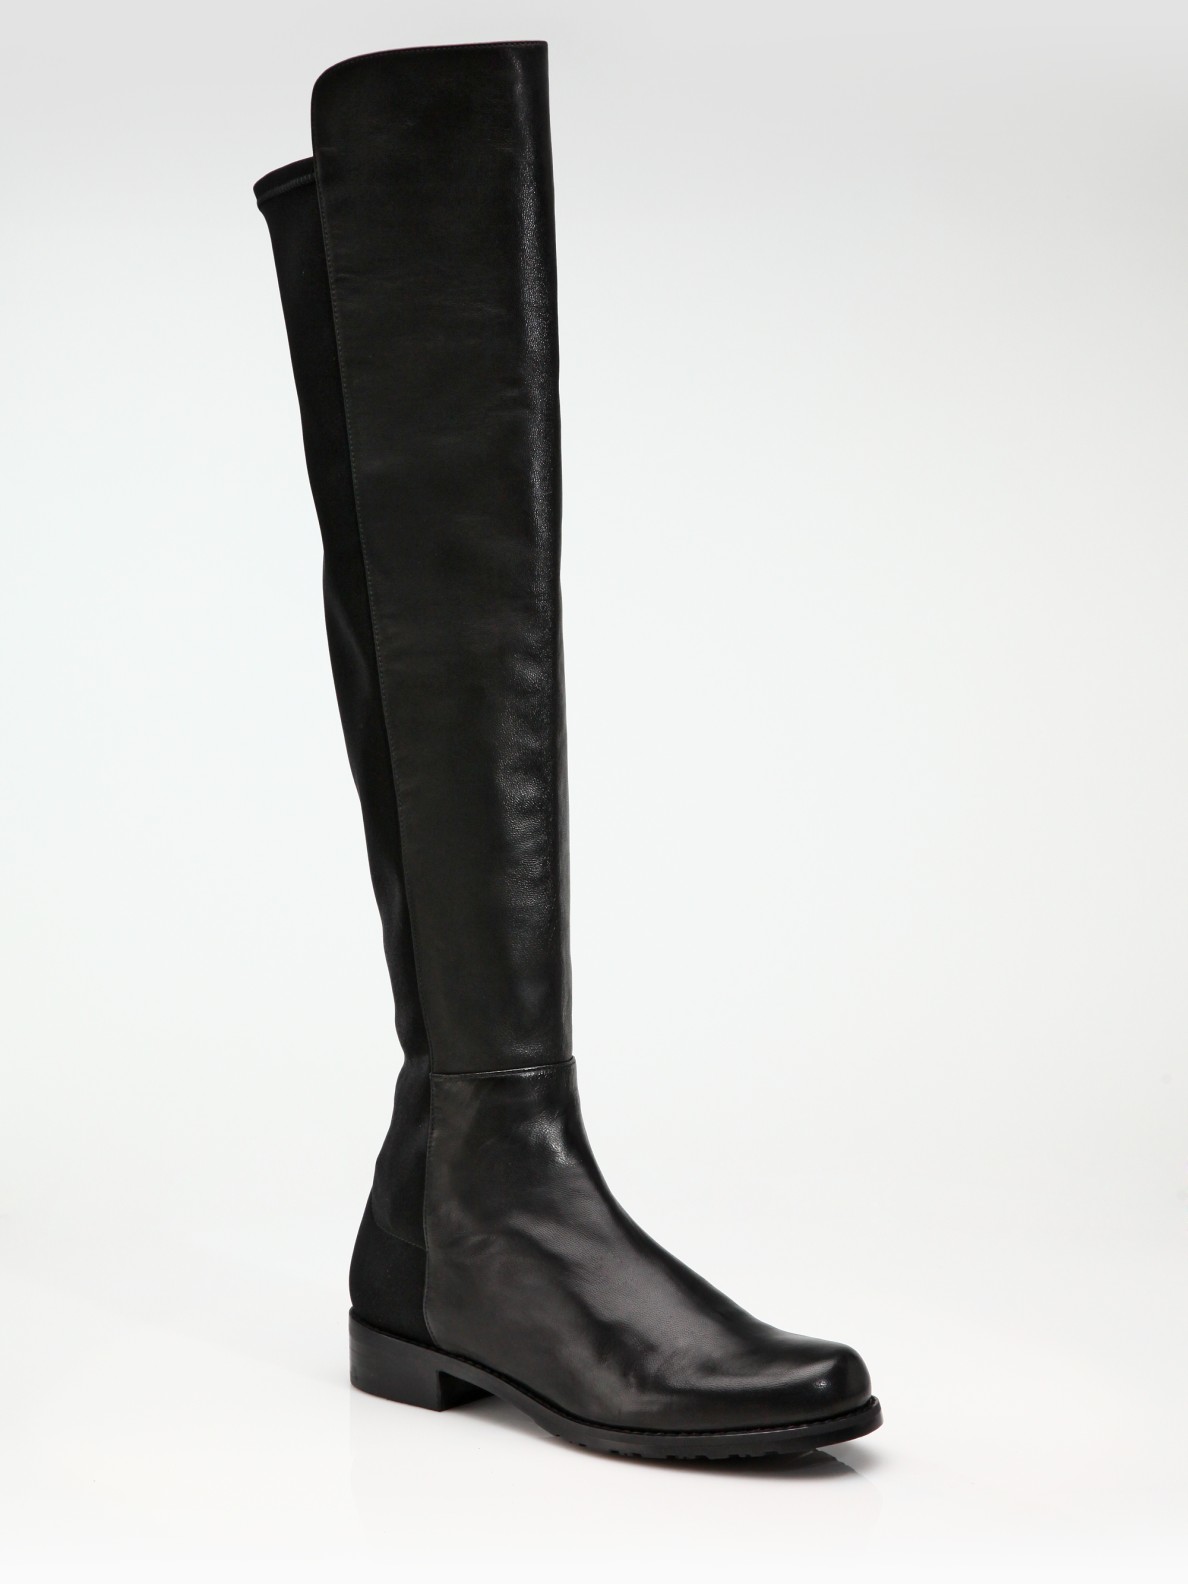 Stuart Weitzman Nappa Leather Flat Over-the-knee Boots in Black | Lyst